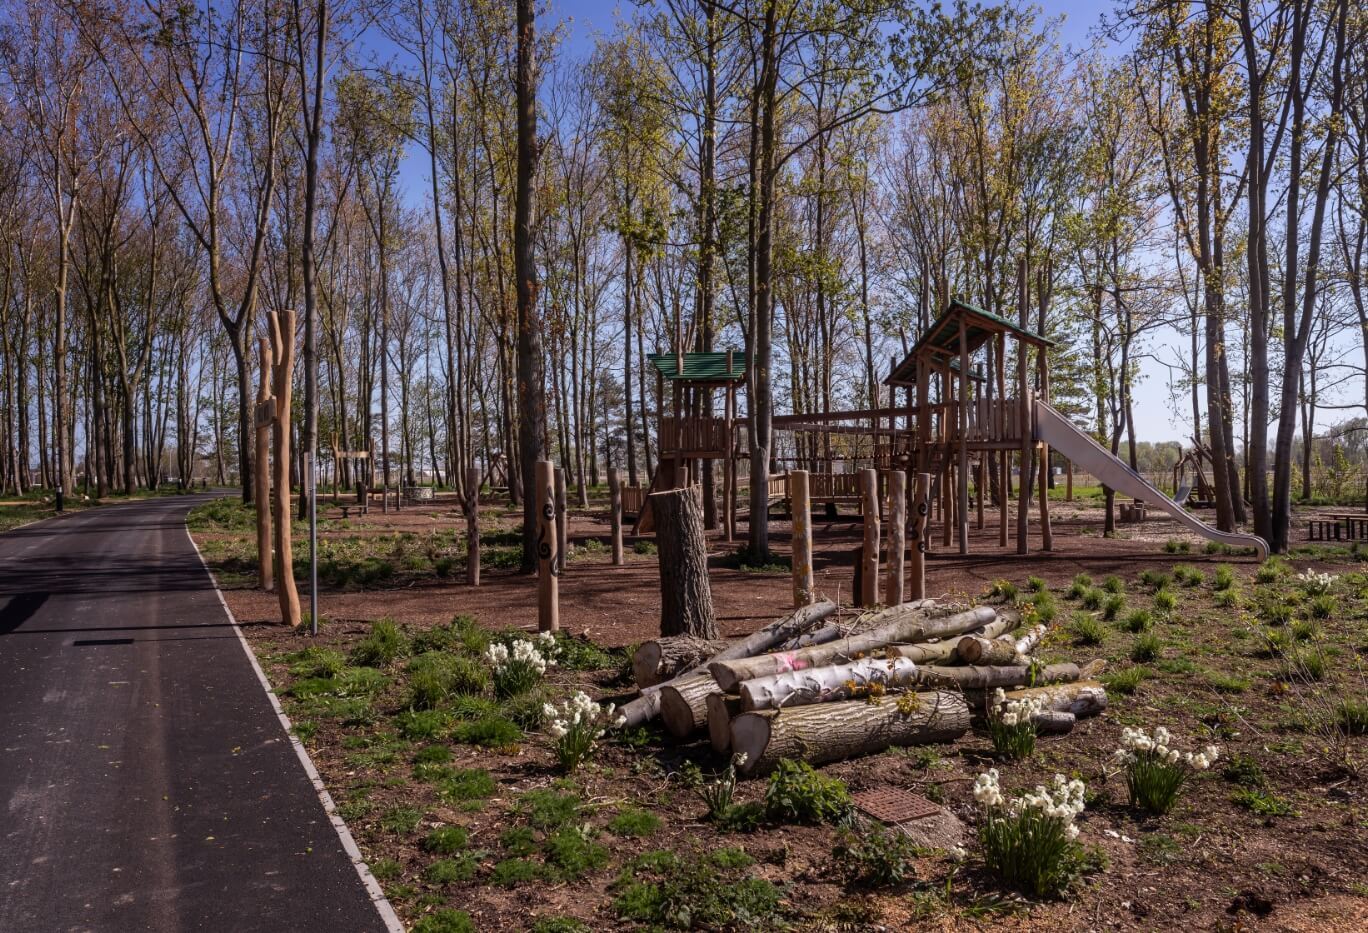 Wild Woods play area at Waterbeach